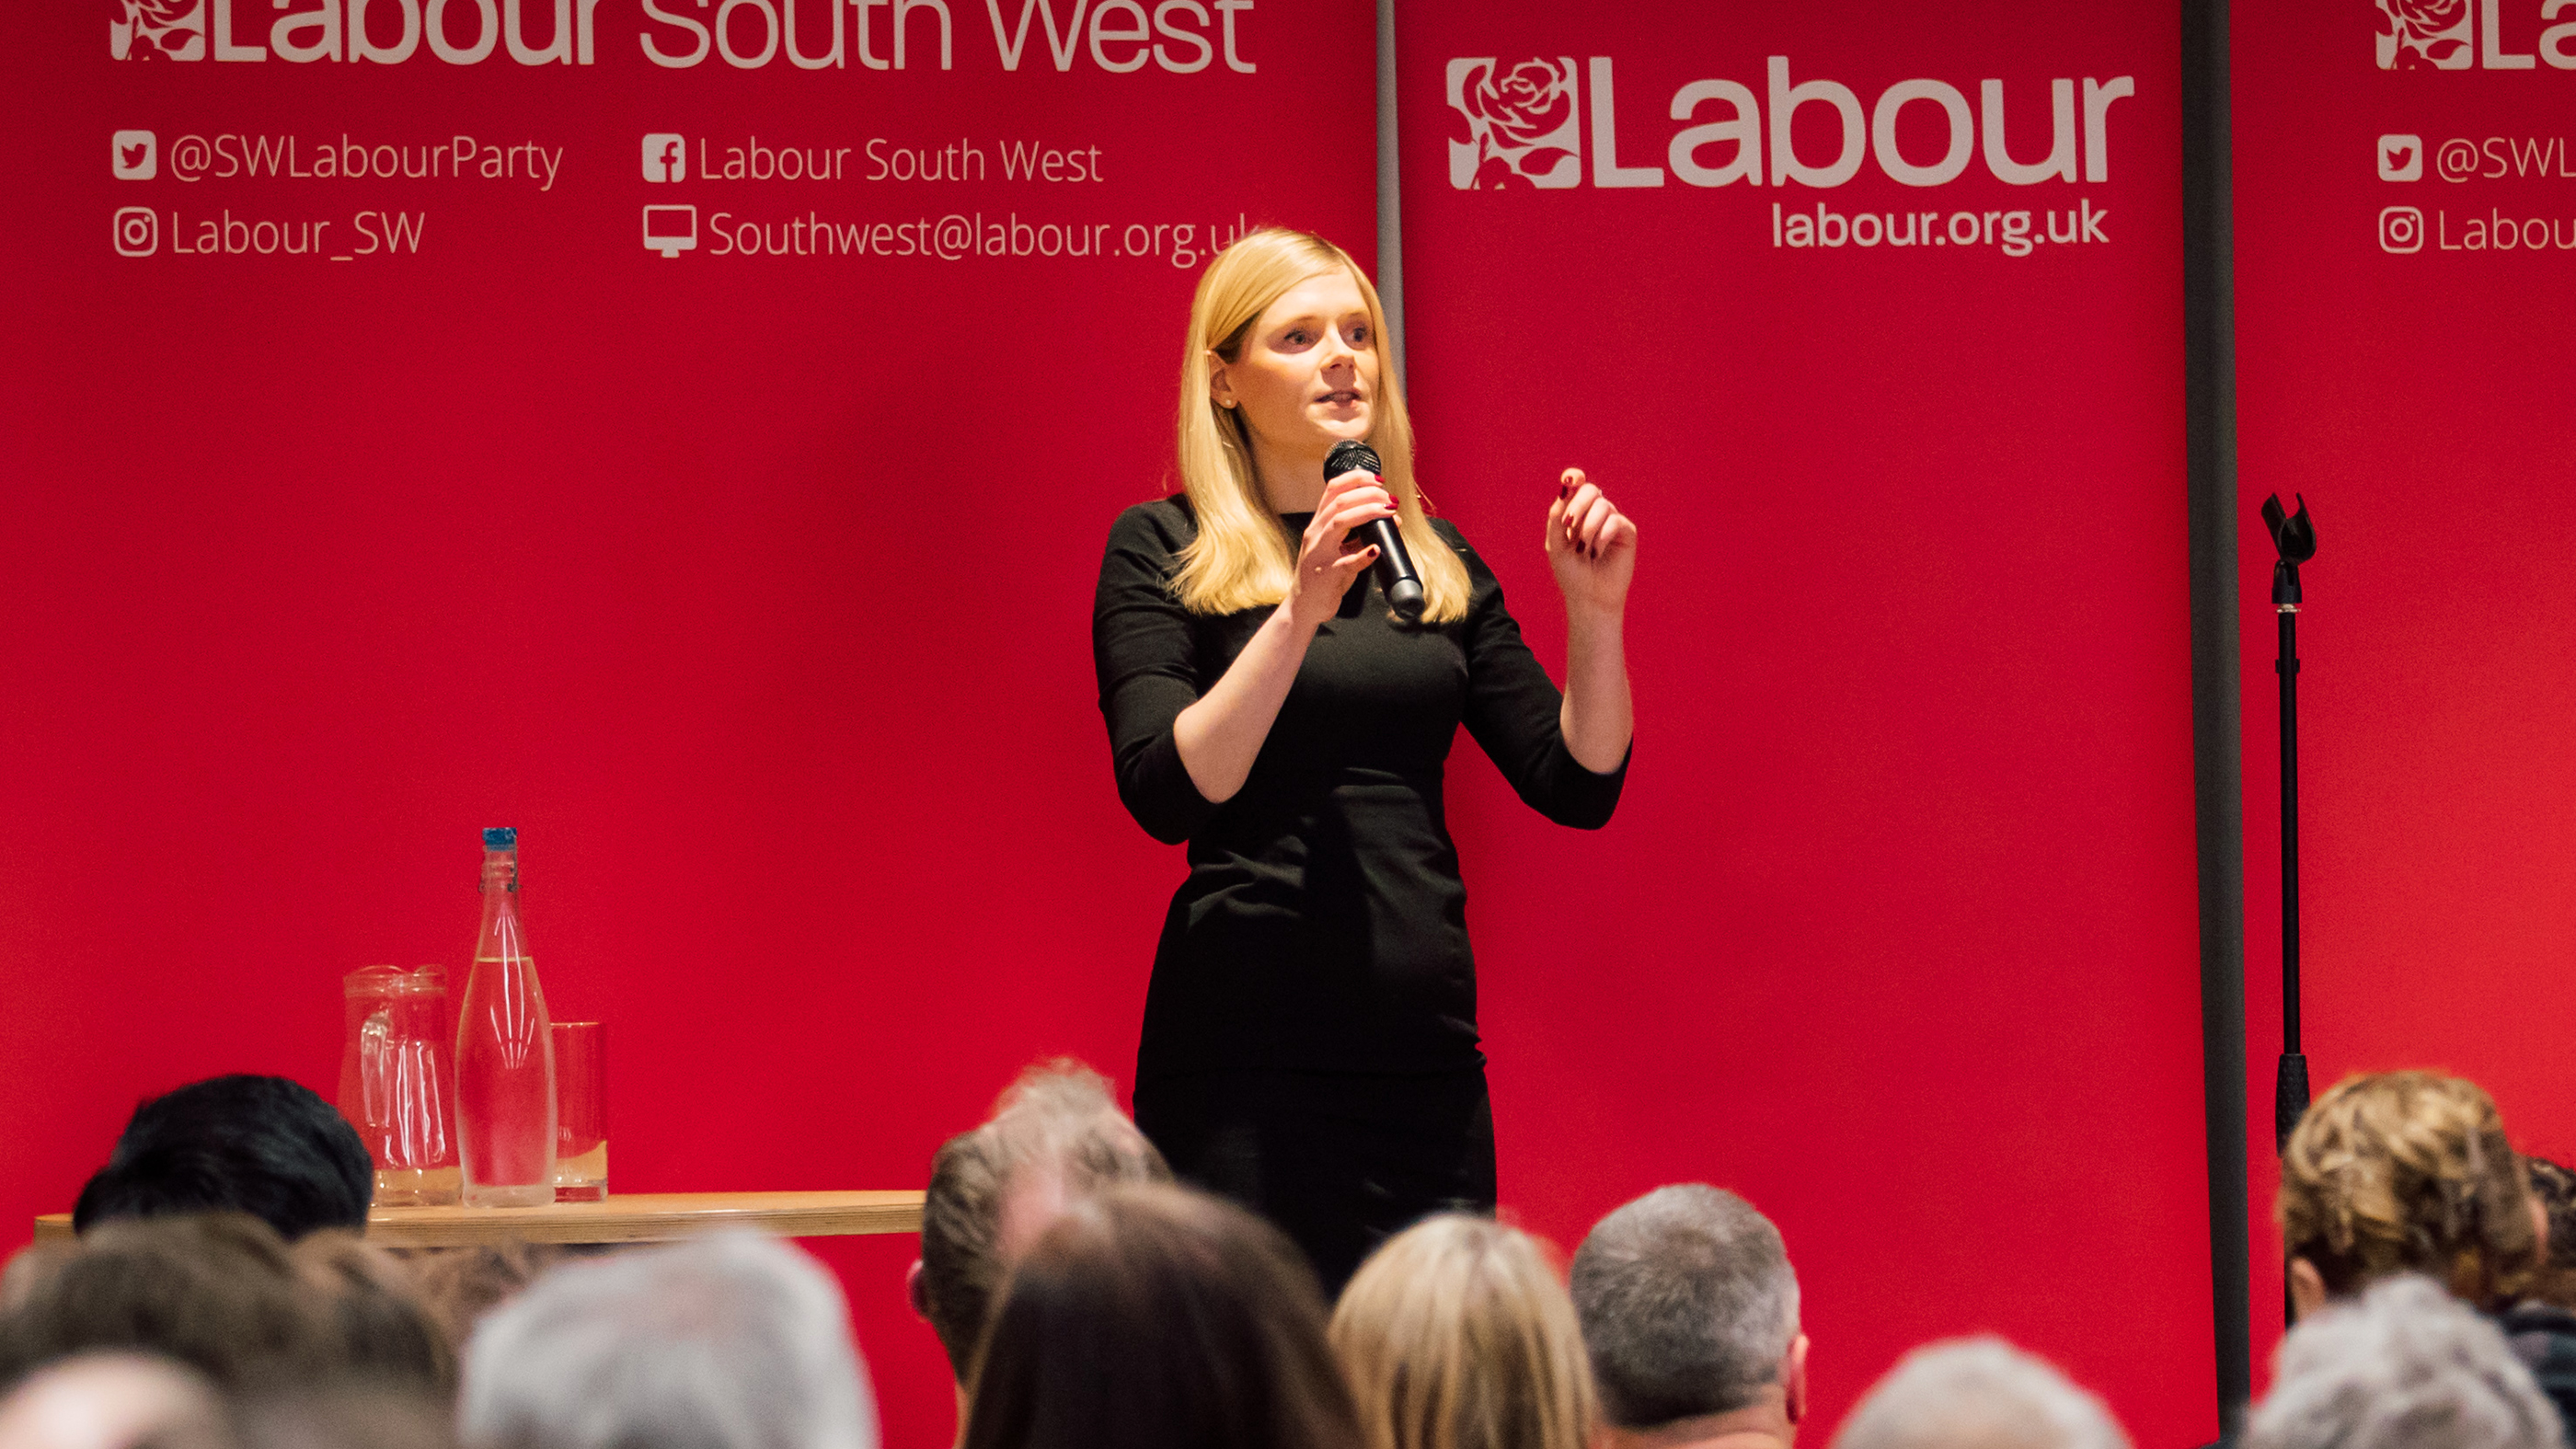 A woman (Claire Hazelgrove) speaking on stage at a Labour event.